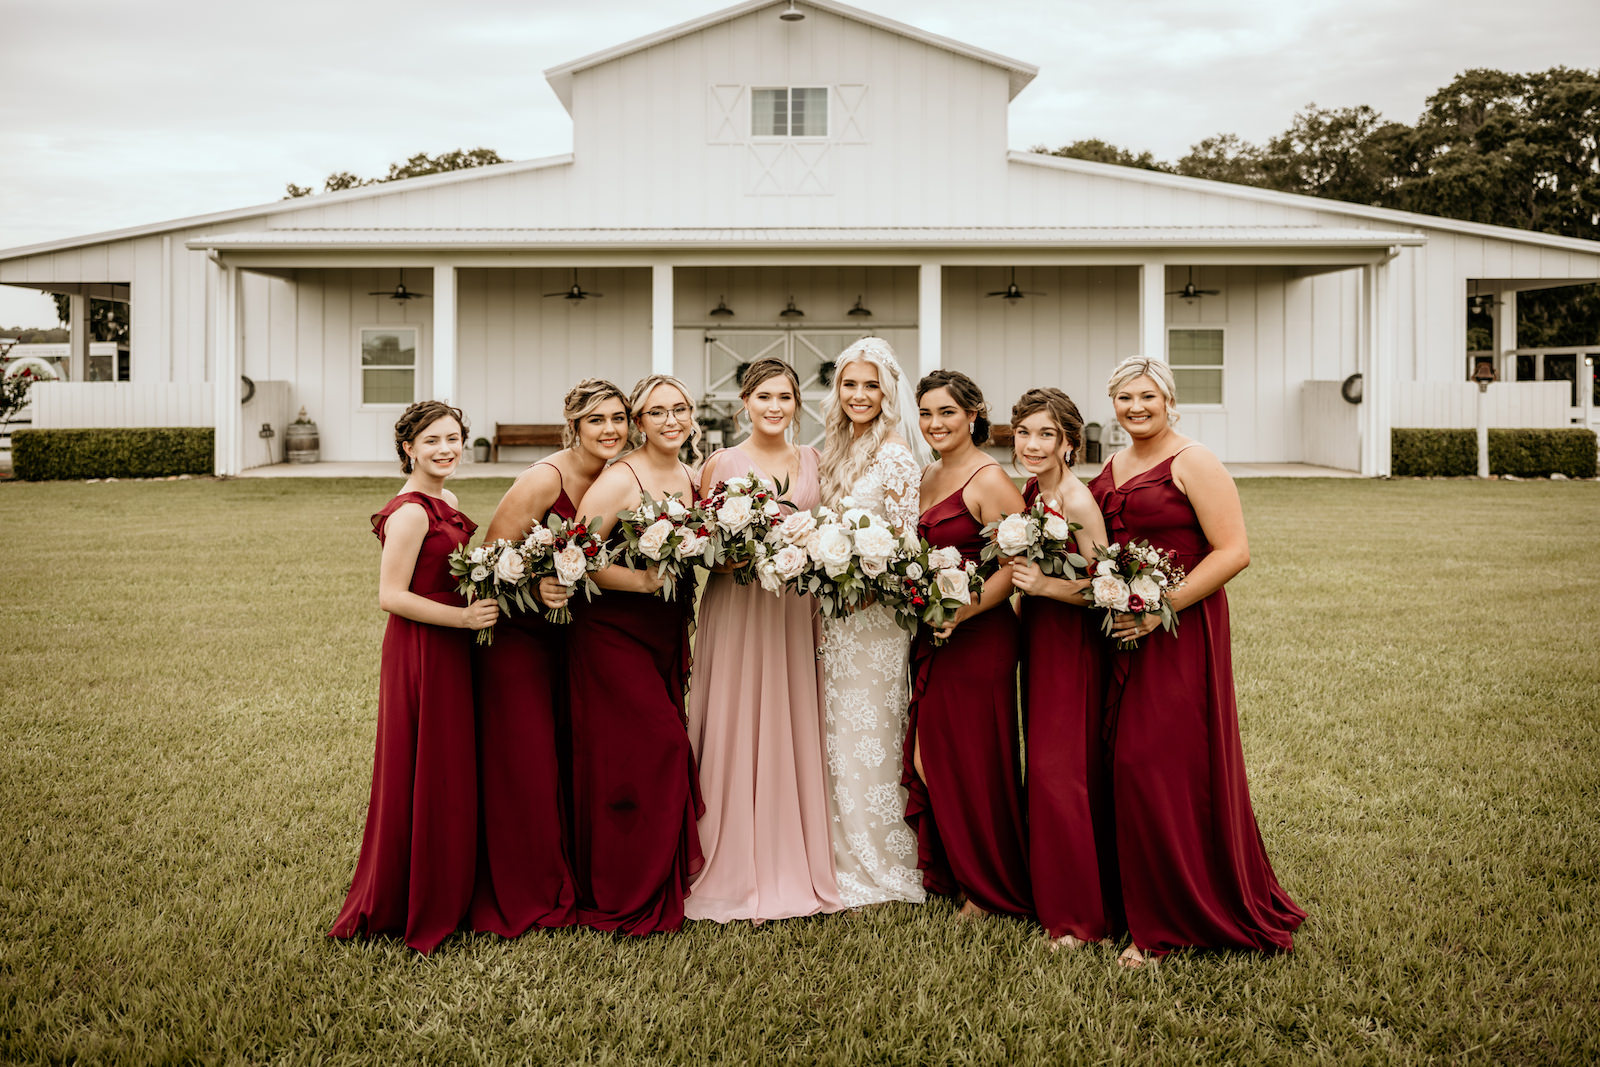 Burgundy and Blush Mix and Match Floor Length Bridesmaids Dresses with Blush White and Burgundy Rose Bouquets with Greenery | Covington Farm